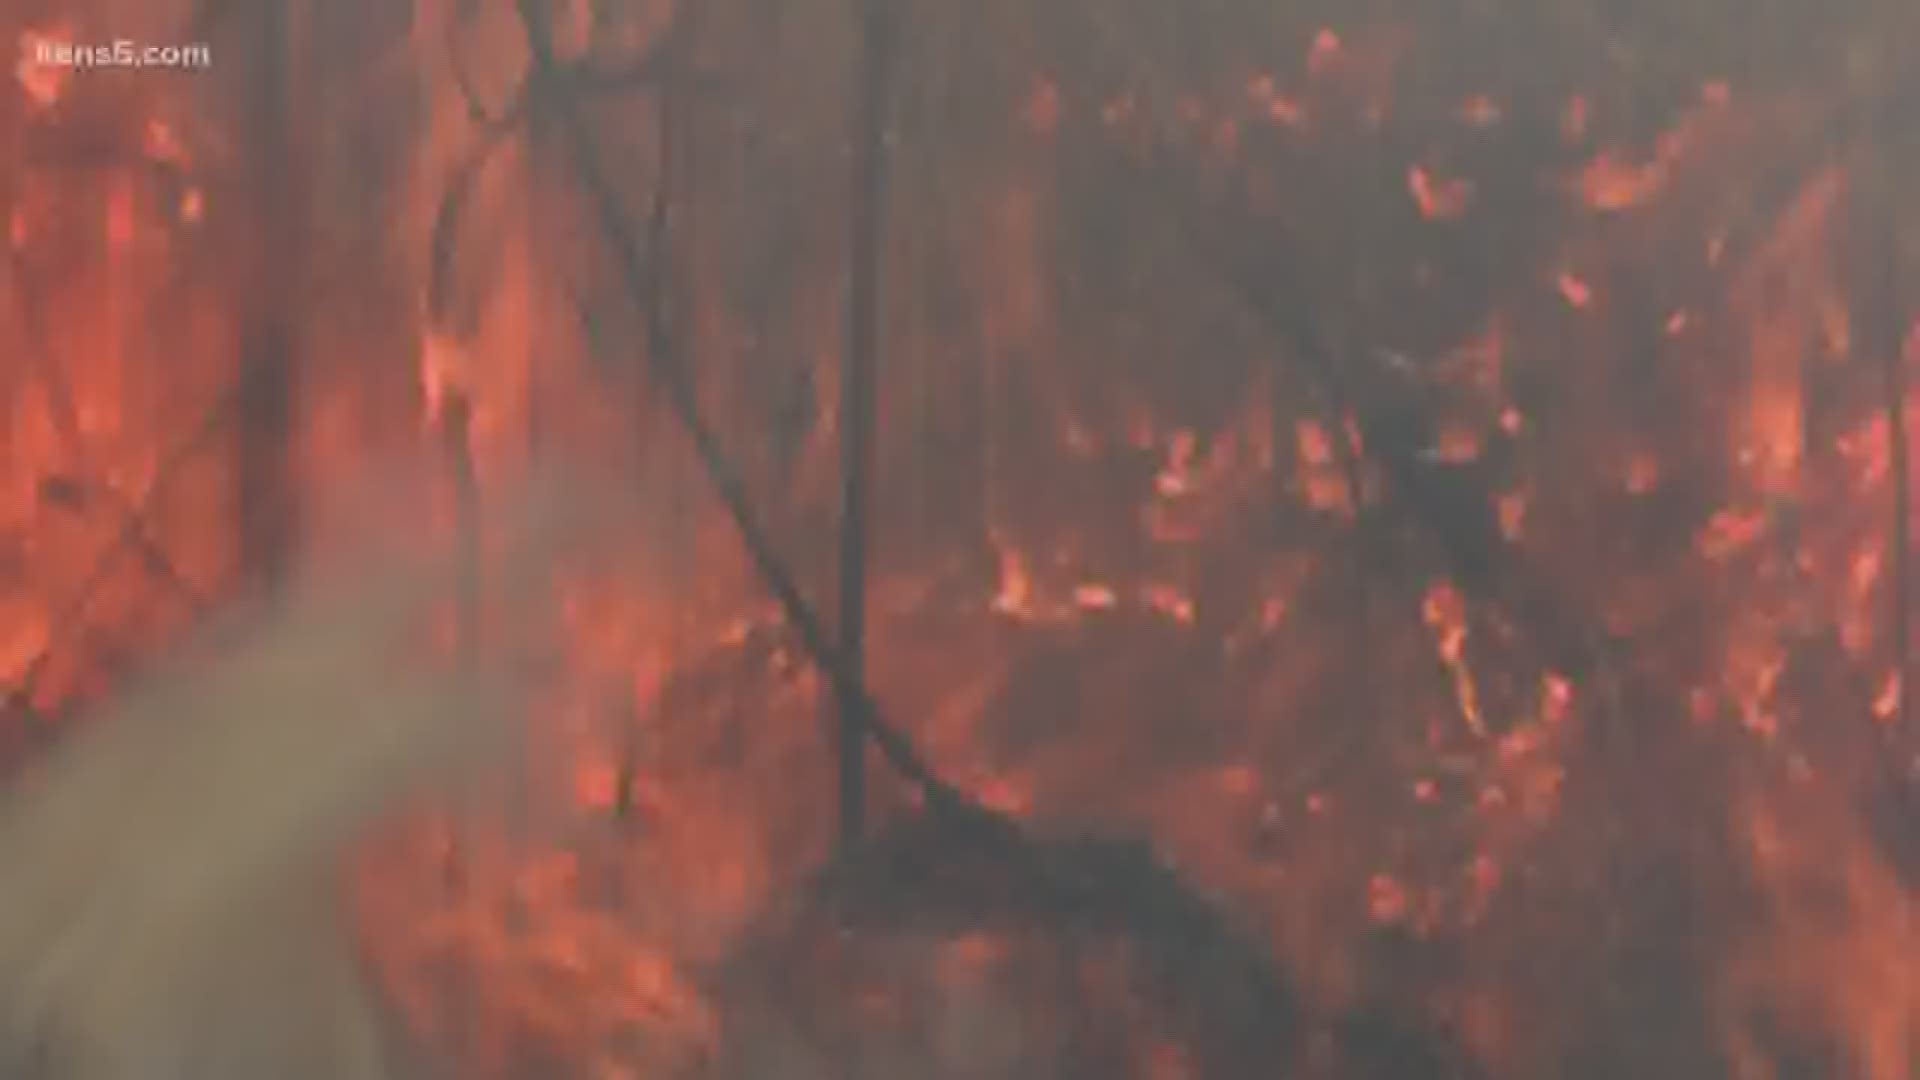 Take a look at what happened on the Mission Reach of the San Antonio River today. A rangeland fire ate through acres of territory in south San Antonio. Eyewitness News reporter Sue Calberg explains.